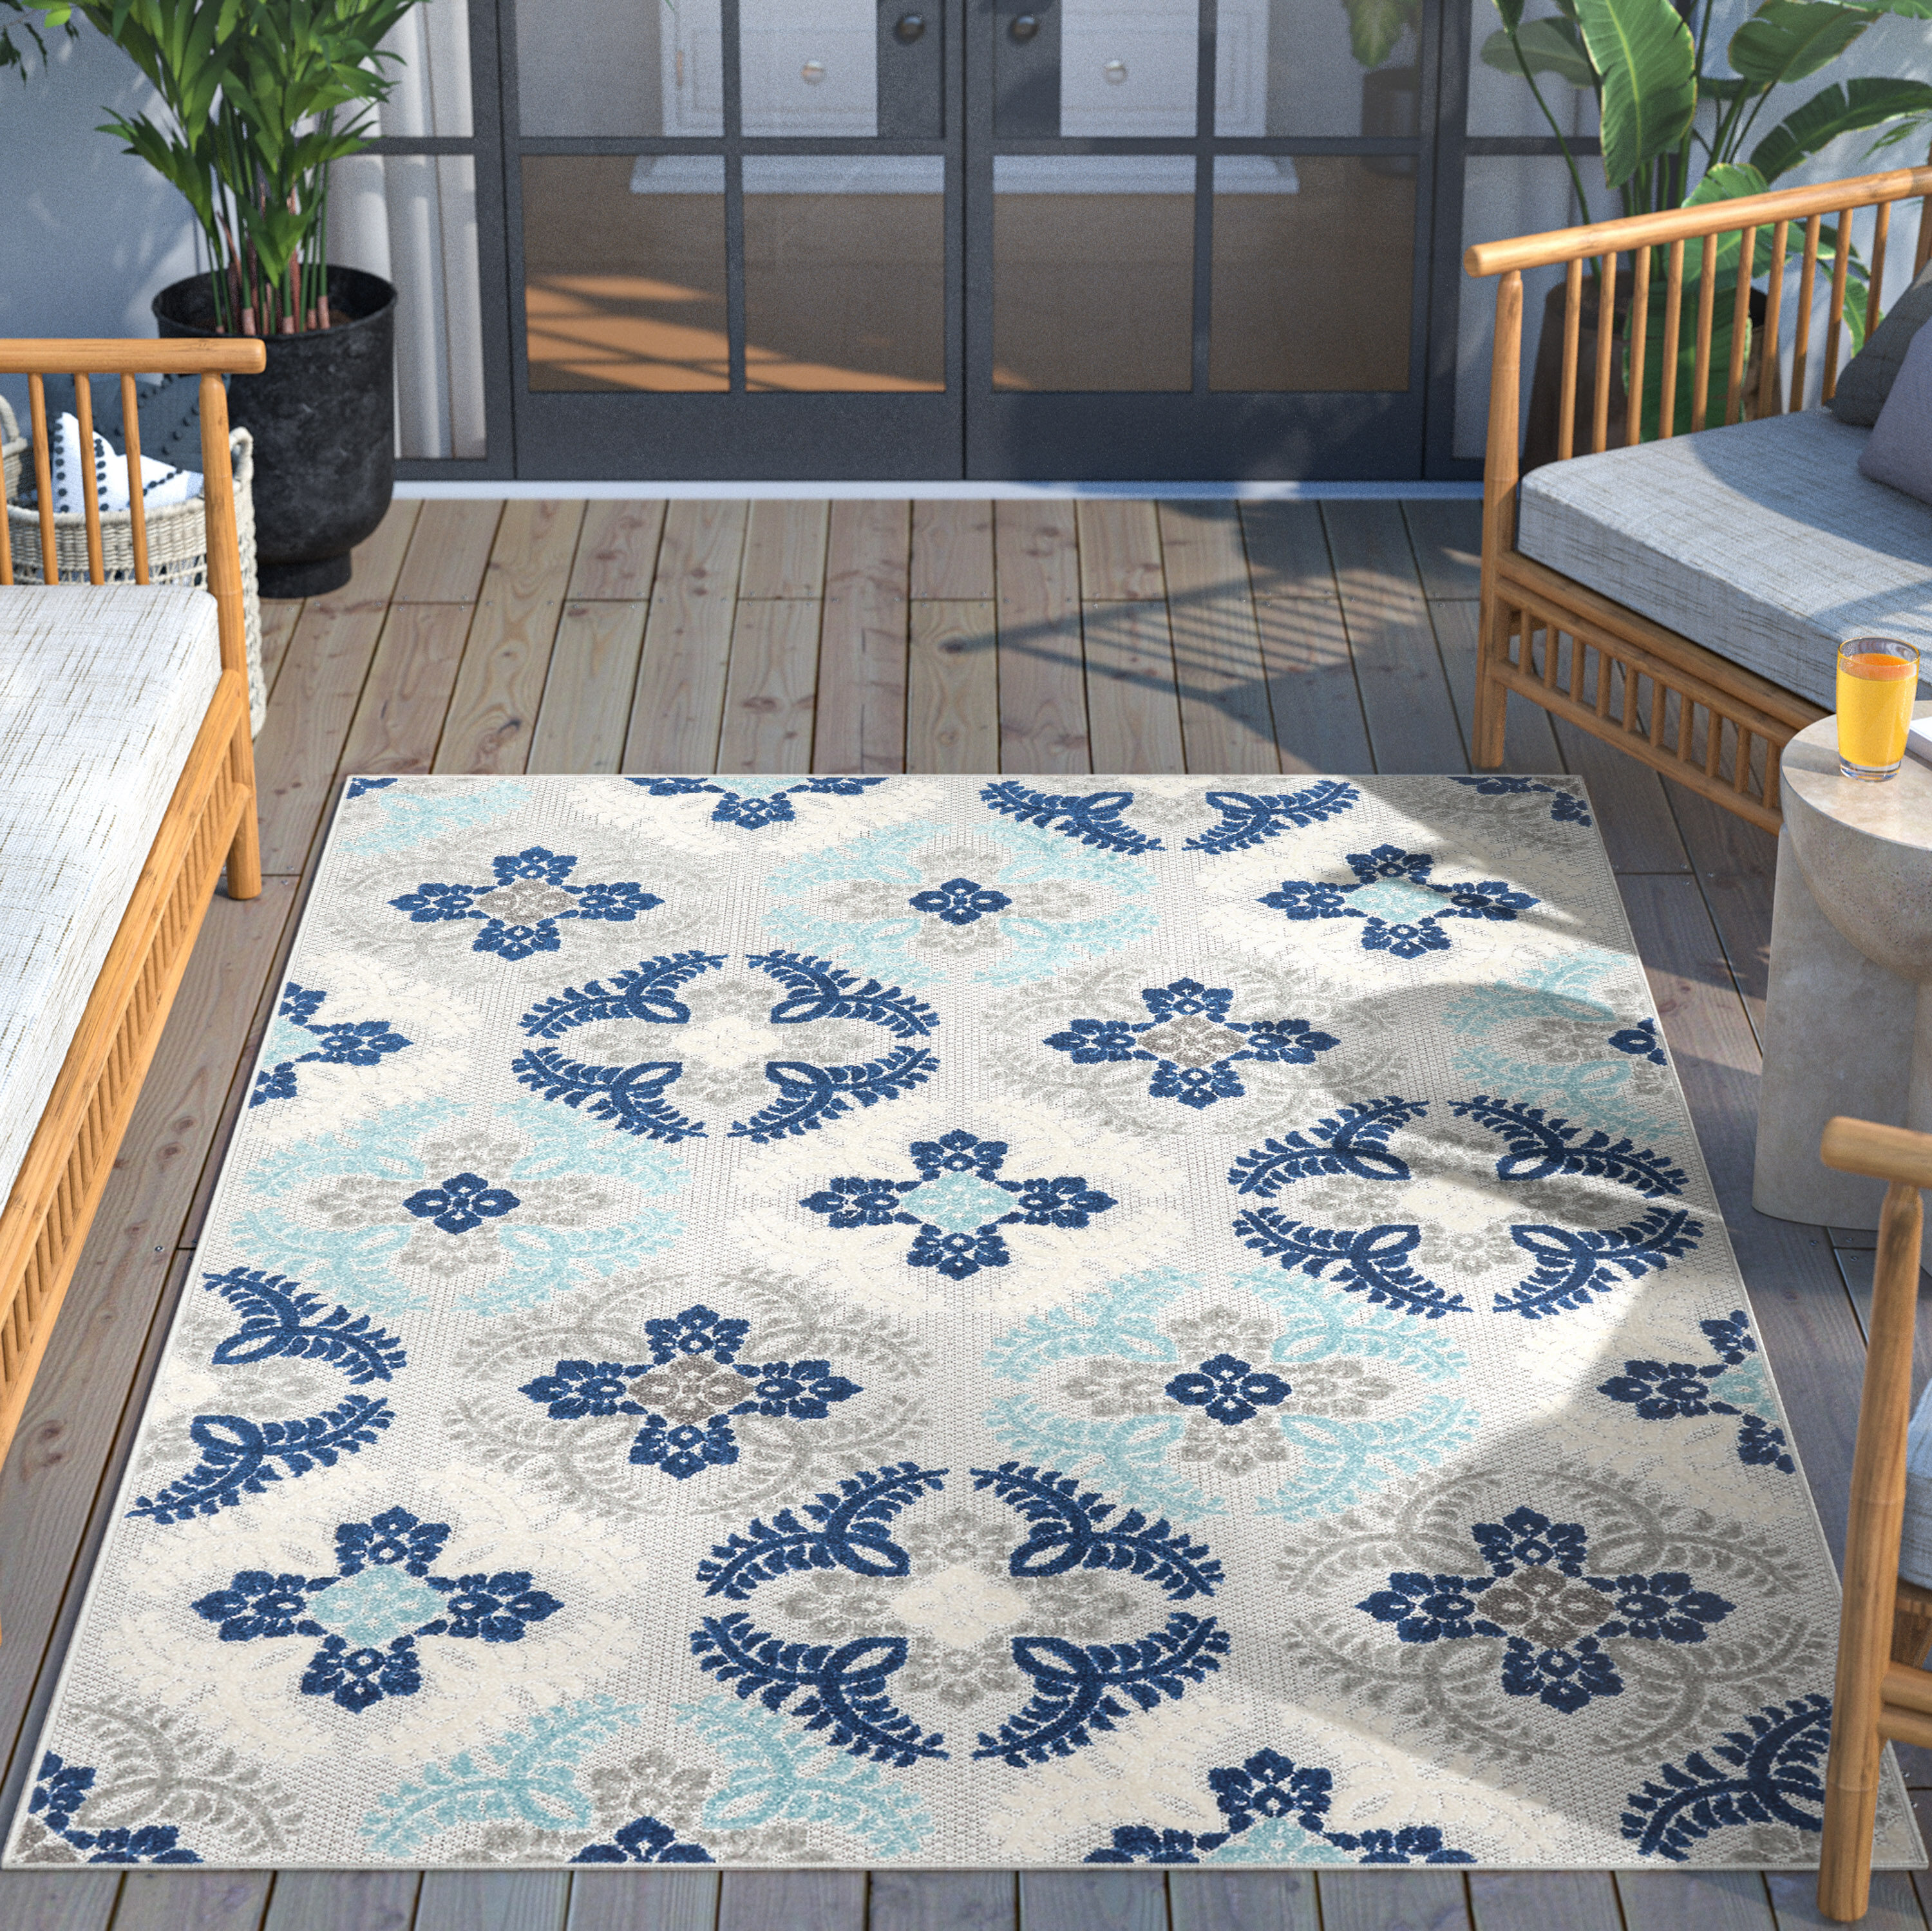 5 Rug Modern the in Well Rugs 7 Area at department Woven Frieze Indoor/Outdoor x Blue Geometric Mid-century